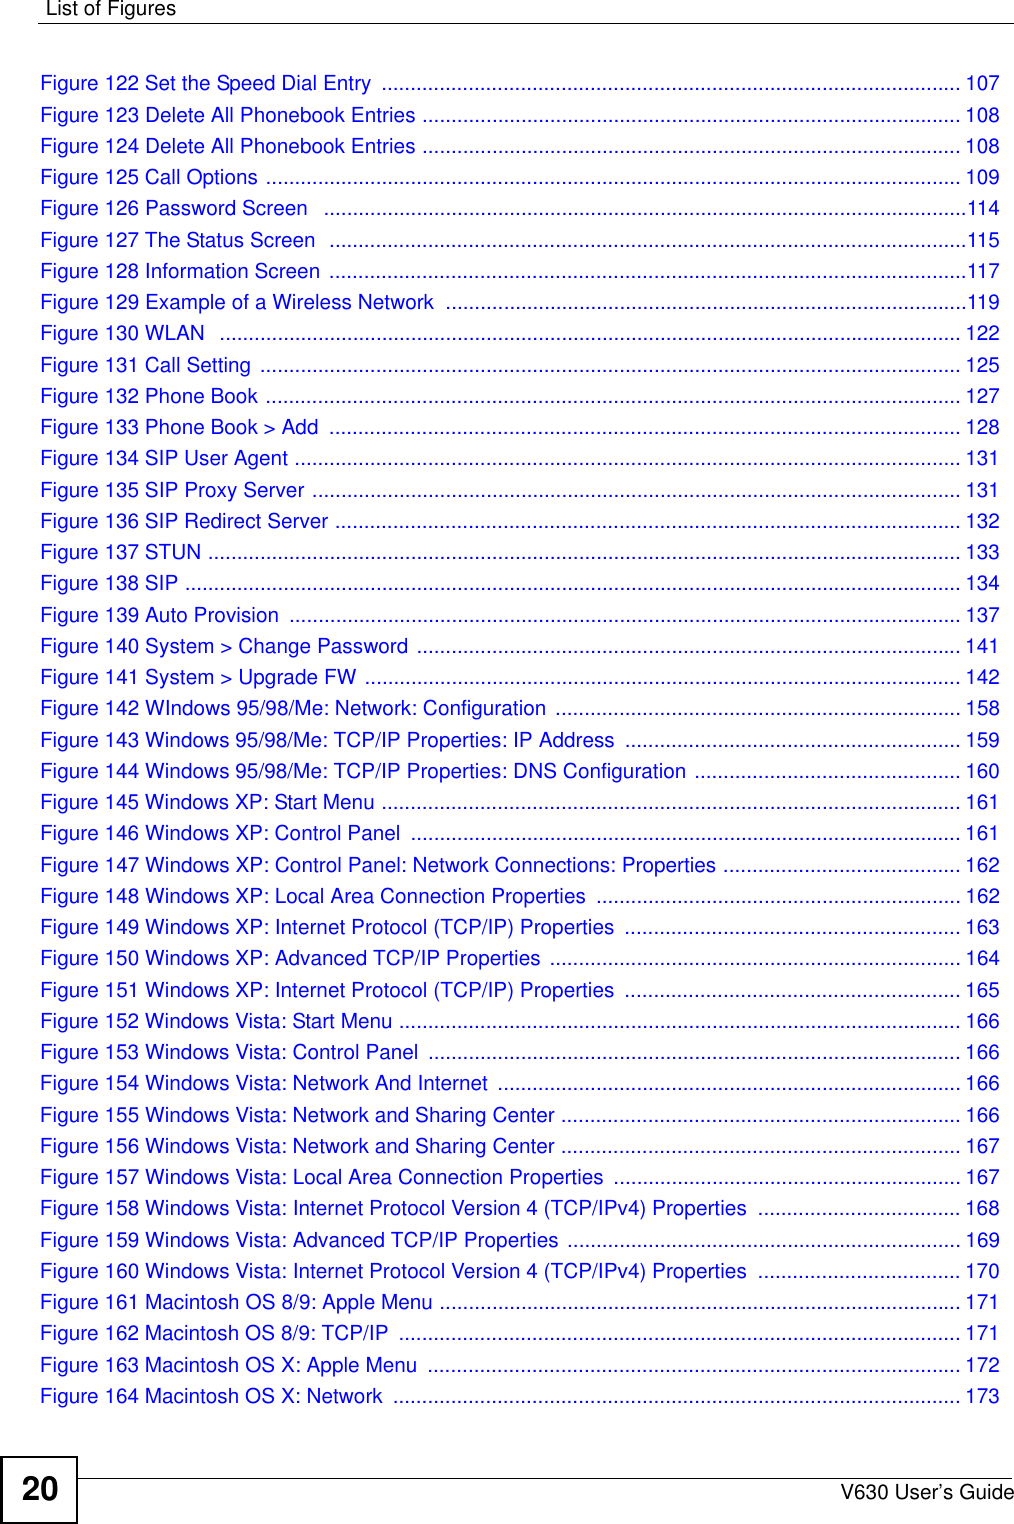 List of FiguresV630 User’s Guide20Figure 122 Set the Speed Dial Entry  .................................................................................................... 107Figure 123 Delete All Phonebook Entries ............................................................................................. 108Figure 124 Delete All Phonebook Entries ............................................................................................. 108Figure 125 Call Options ........................................................................................................................ 109Figure 126 Password Screen   ...............................................................................................................114Figure 127 The Status Screen  ..............................................................................................................115Figure 128 Information Screen ..............................................................................................................117Figure 129 Example of a Wireless Network  ..........................................................................................119Figure 130 WLAN  ................................................................................................................................ 122Figure 131 Call Setting  ......................................................................................................................... 125Figure 132 Phone Book ........................................................................................................................ 127Figure 133 Phone Book &gt; Add  ............................................................................................................. 128Figure 134 SIP User Agent ................................................................................................................... 131Figure 135 SIP Proxy Server ................................................................................................................ 131Figure 136 SIP Redirect Server ............................................................................................................ 132Figure 137 STUN .................................................................................................................................. 133Figure 138 SIP ...................................................................................................................................... 134Figure 139 Auto Provision  .................................................................................................................... 137Figure 140 System &gt; Change Password .............................................................................................. 141Figure 141 System &gt; Upgrade FW ....................................................................................................... 142Figure 142 WIndows 95/98/Me: Network: Configuration  ...................................................................... 158Figure 143 Windows 95/98/Me: TCP/IP Properties: IP Address  .......................................................... 159Figure 144 Windows 95/98/Me: TCP/IP Properties: DNS Configuration .............................................. 160Figure 145 Windows XP: Start Menu .................................................................................................... 161Figure 146 Windows XP: Control Panel  ............................................................................................... 161Figure 147 Windows XP: Control Panel: Network Connections: Properties ......................................... 162Figure 148 Windows XP: Local Area Connection Properties ............................................................... 162Figure 149 Windows XP: Internet Protocol (TCP/IP) Properties  .......................................................... 163Figure 150 Windows XP: Advanced TCP/IP Properties ....................................................................... 164Figure 151 Windows XP: Internet Protocol (TCP/IP) Properties  .......................................................... 165Figure 152 Windows Vista: Start Menu ................................................................................................. 166Figure 153 Windows Vista: Control Panel  ............................................................................................ 166Figure 154 Windows Vista: Network And Internet  ................................................................................ 166Figure 155 Windows Vista: Network and Sharing Center ..................................................................... 166Figure 156 Windows Vista: Network and Sharing Center ..................................................................... 167Figure 157 Windows Vista: Local Area Connection Properties ............................................................ 167Figure 158 Windows Vista: Internet Protocol Version 4 (TCP/IPv4) Properties  ................................... 168Figure 159 Windows Vista: Advanced TCP/IP Properties .................................................................... 169Figure 160 Windows Vista: Internet Protocol Version 4 (TCP/IPv4) Properties  ................................... 170Figure 161 Macintosh OS 8/9: Apple Menu .......................................................................................... 171Figure 162 Macintosh OS 8/9: TCP/IP  ................................................................................................. 171Figure 163 Macintosh OS X: Apple Menu  ............................................................................................ 172Figure 164 Macintosh OS X: Network  .................................................................................................. 173